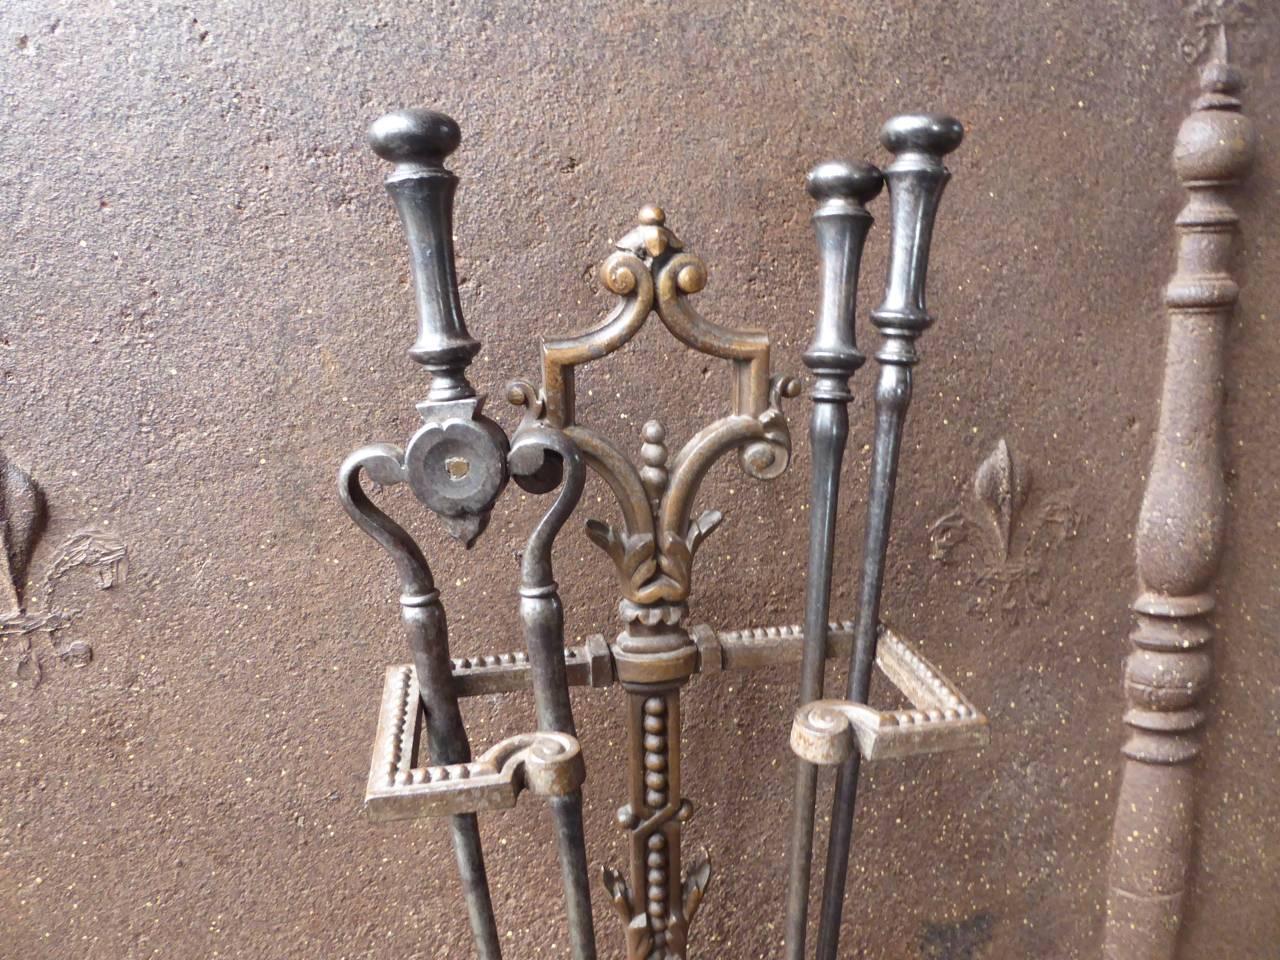 19th century English Georgian fireplace tool set - fire irons made of cast iron and wrought iron.

We have a unique and specialized collection of antique and used fireplace accessories consisting of more than 1000 listings at 1stdibs. Amongst